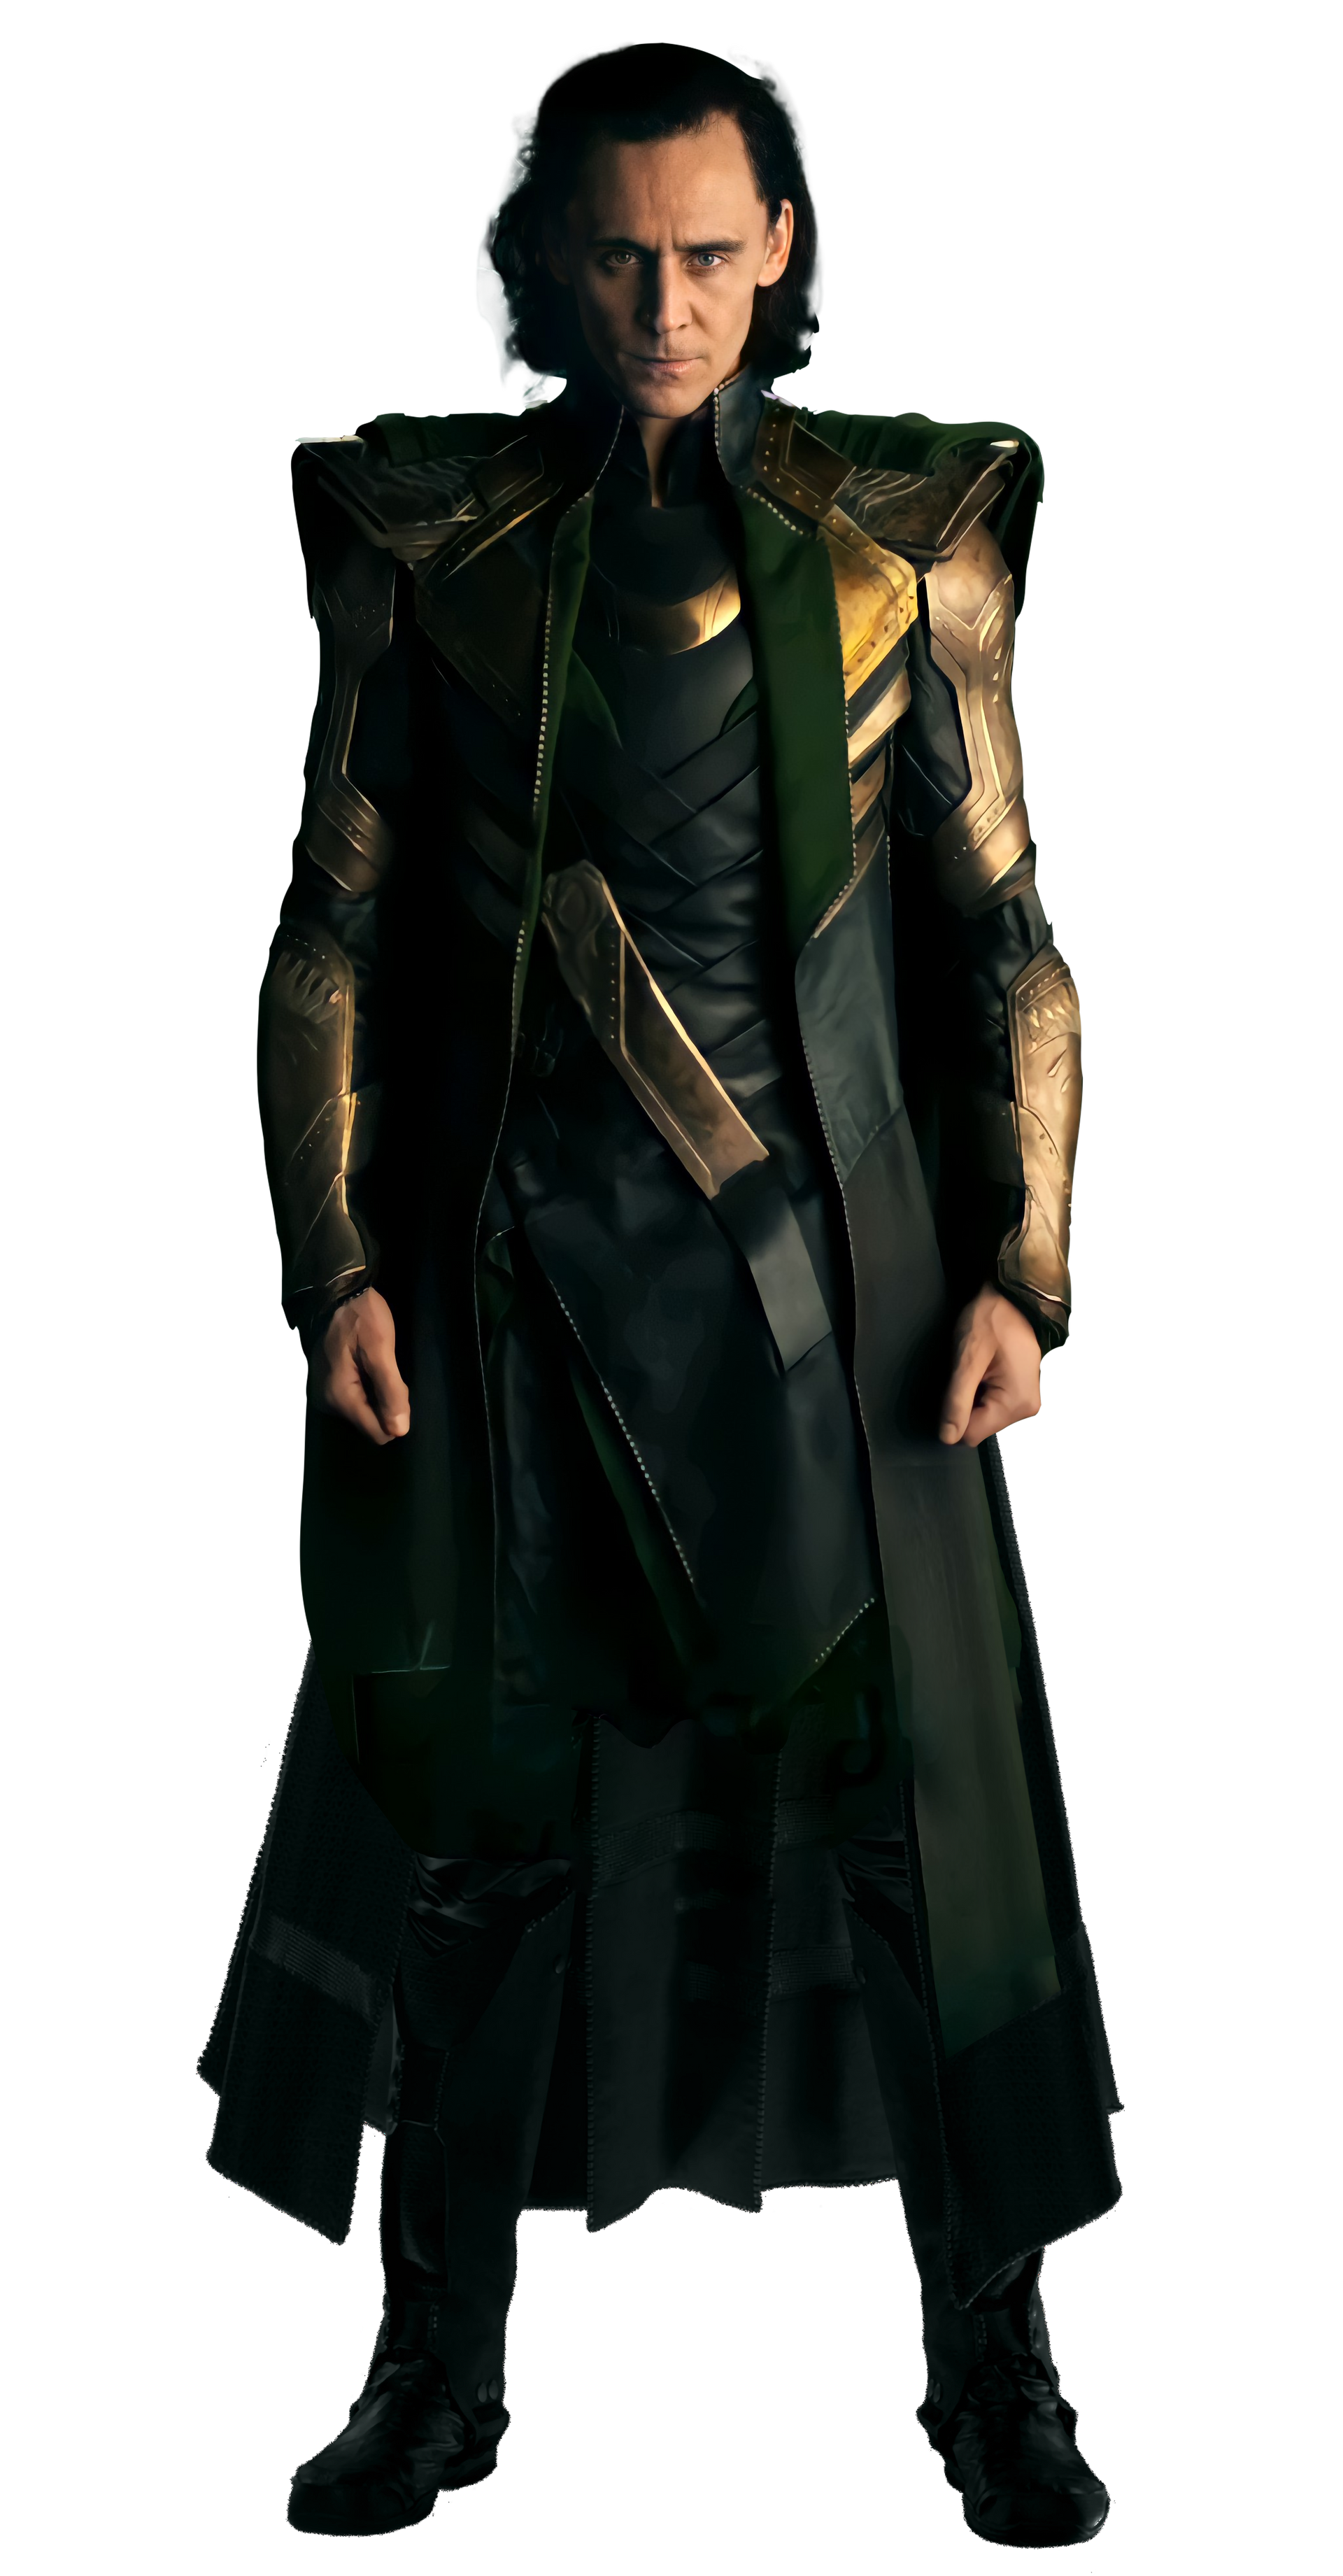 loki_laufey_odinson__avengers_thor_solo_png_by_iwasboredsoididthis_dekq4lt-fullview.png